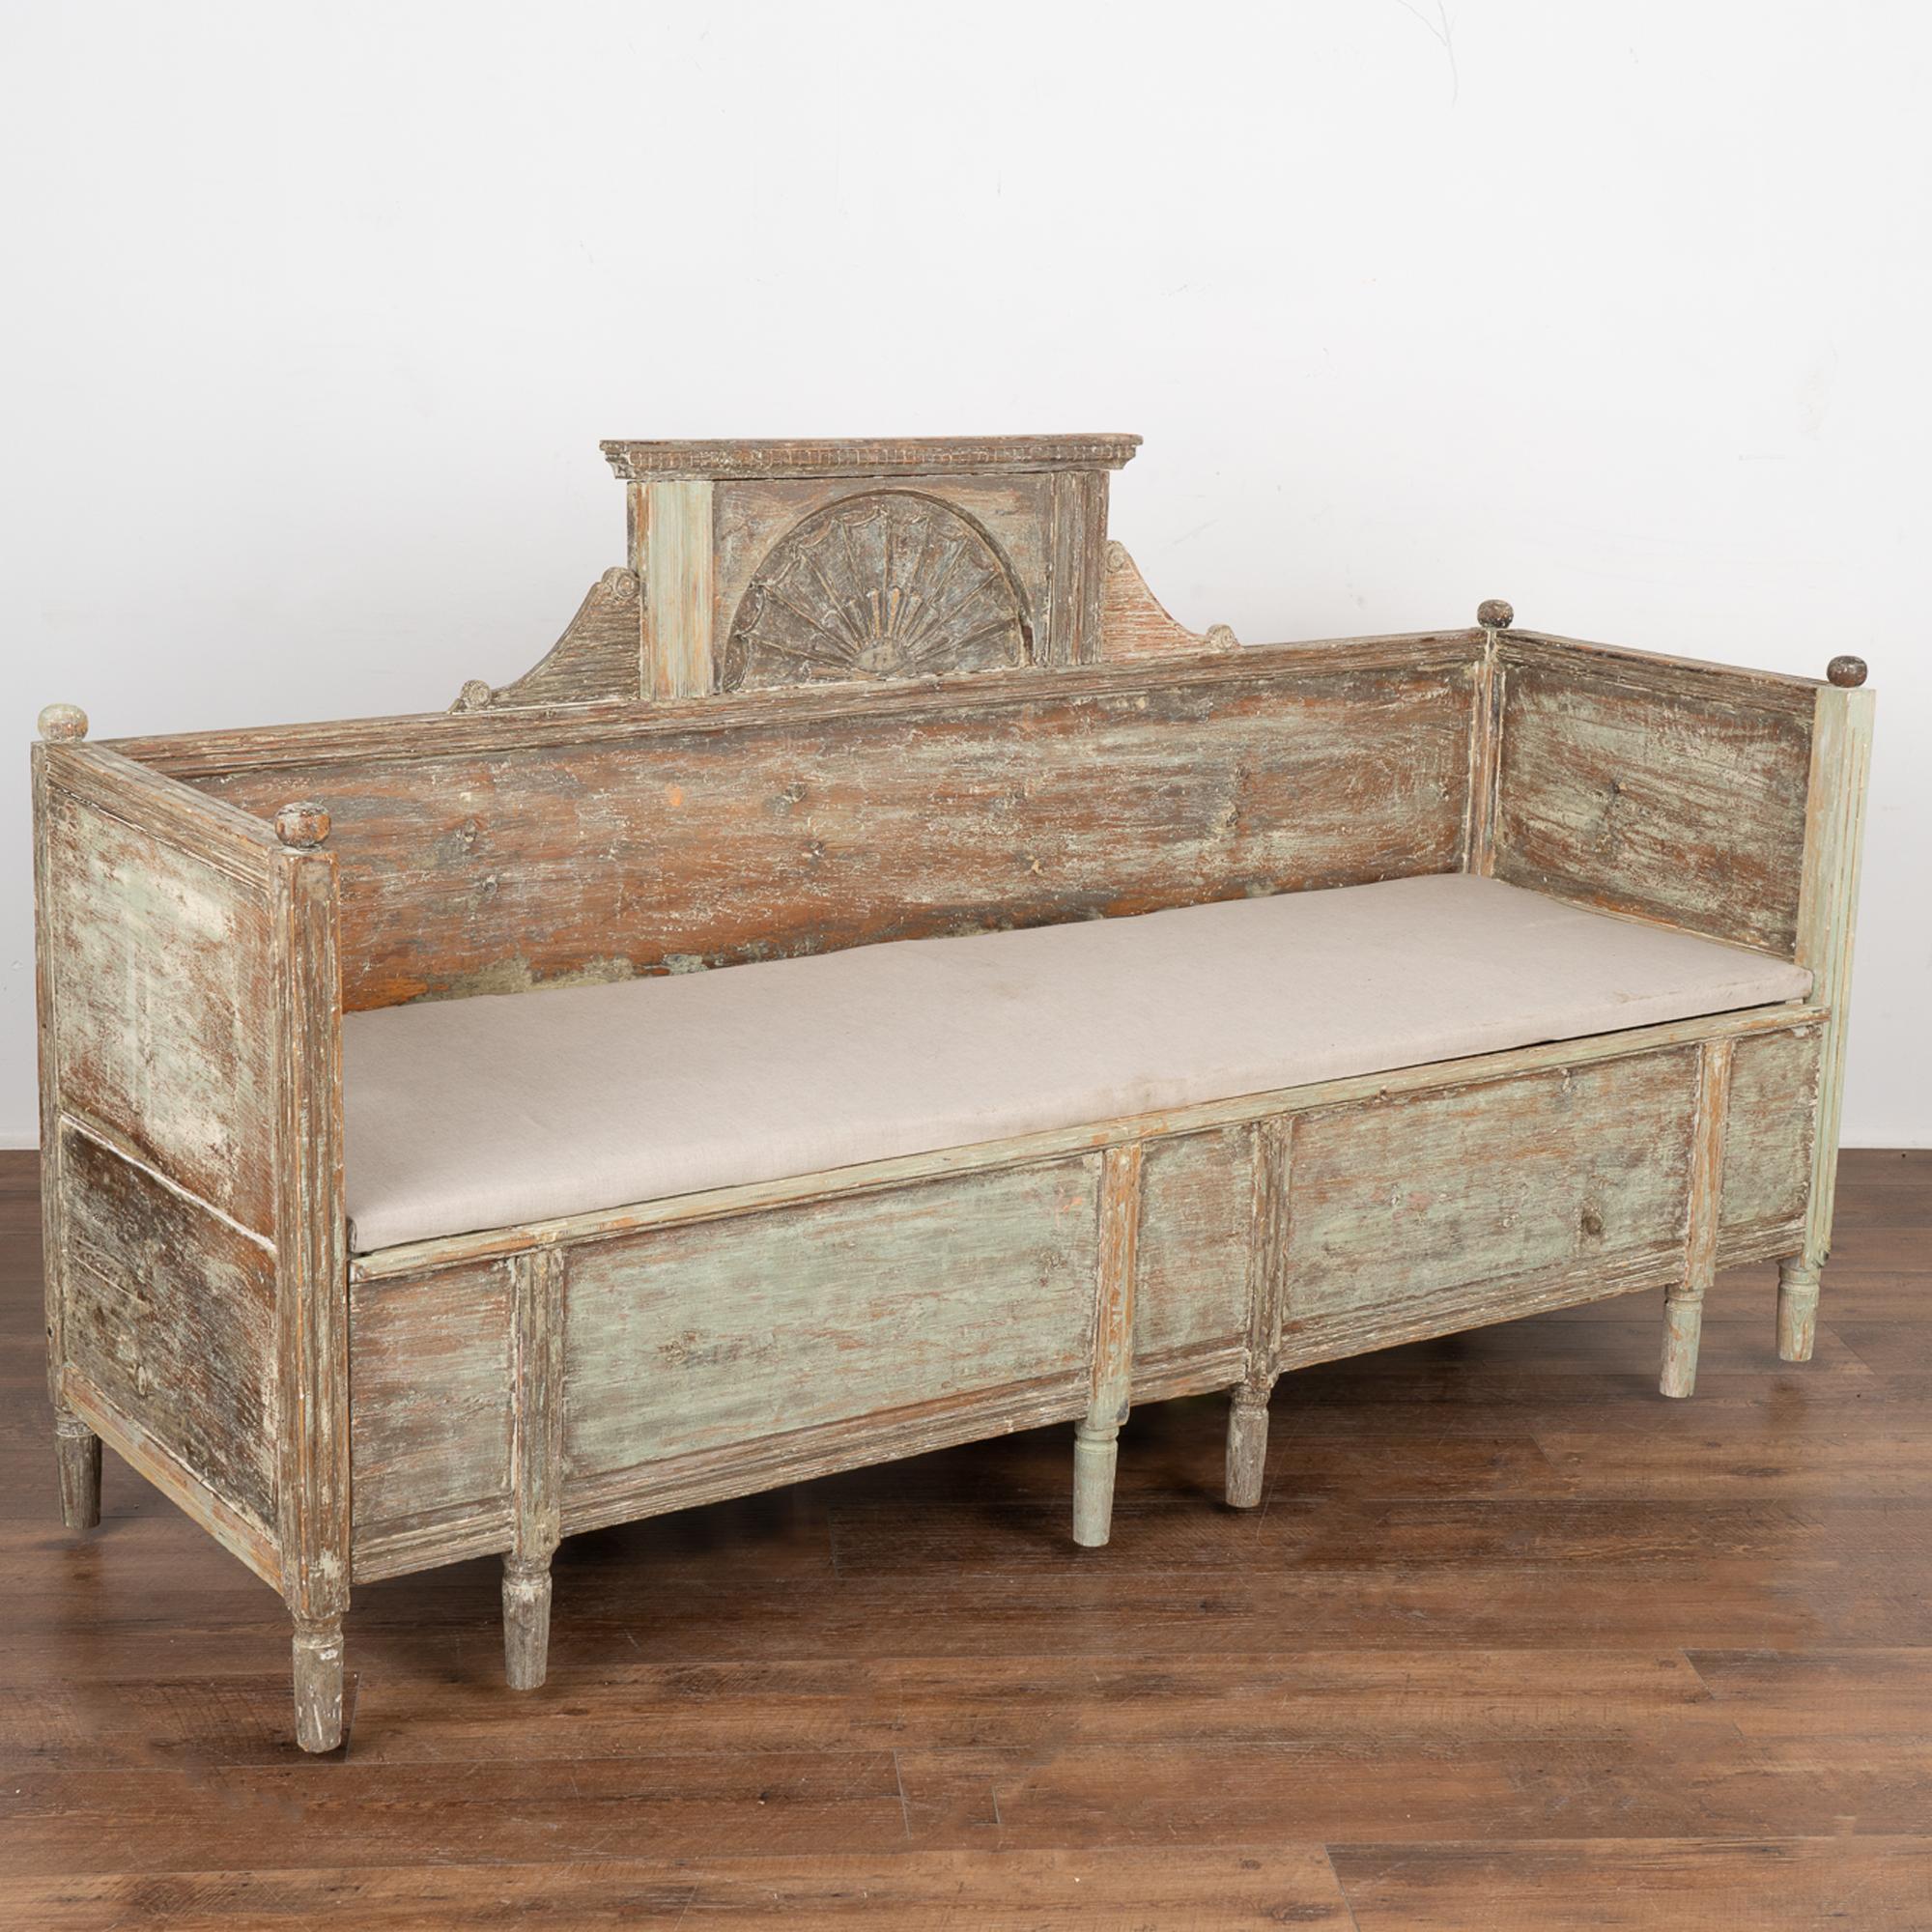 This exceptional Gustavian bench is a special find. Note the original pale green painted finish, now scraped down revealing a warm aged patina reflecting the age and grace of this lovely bench.
The finials, feet, and decorative carved details of